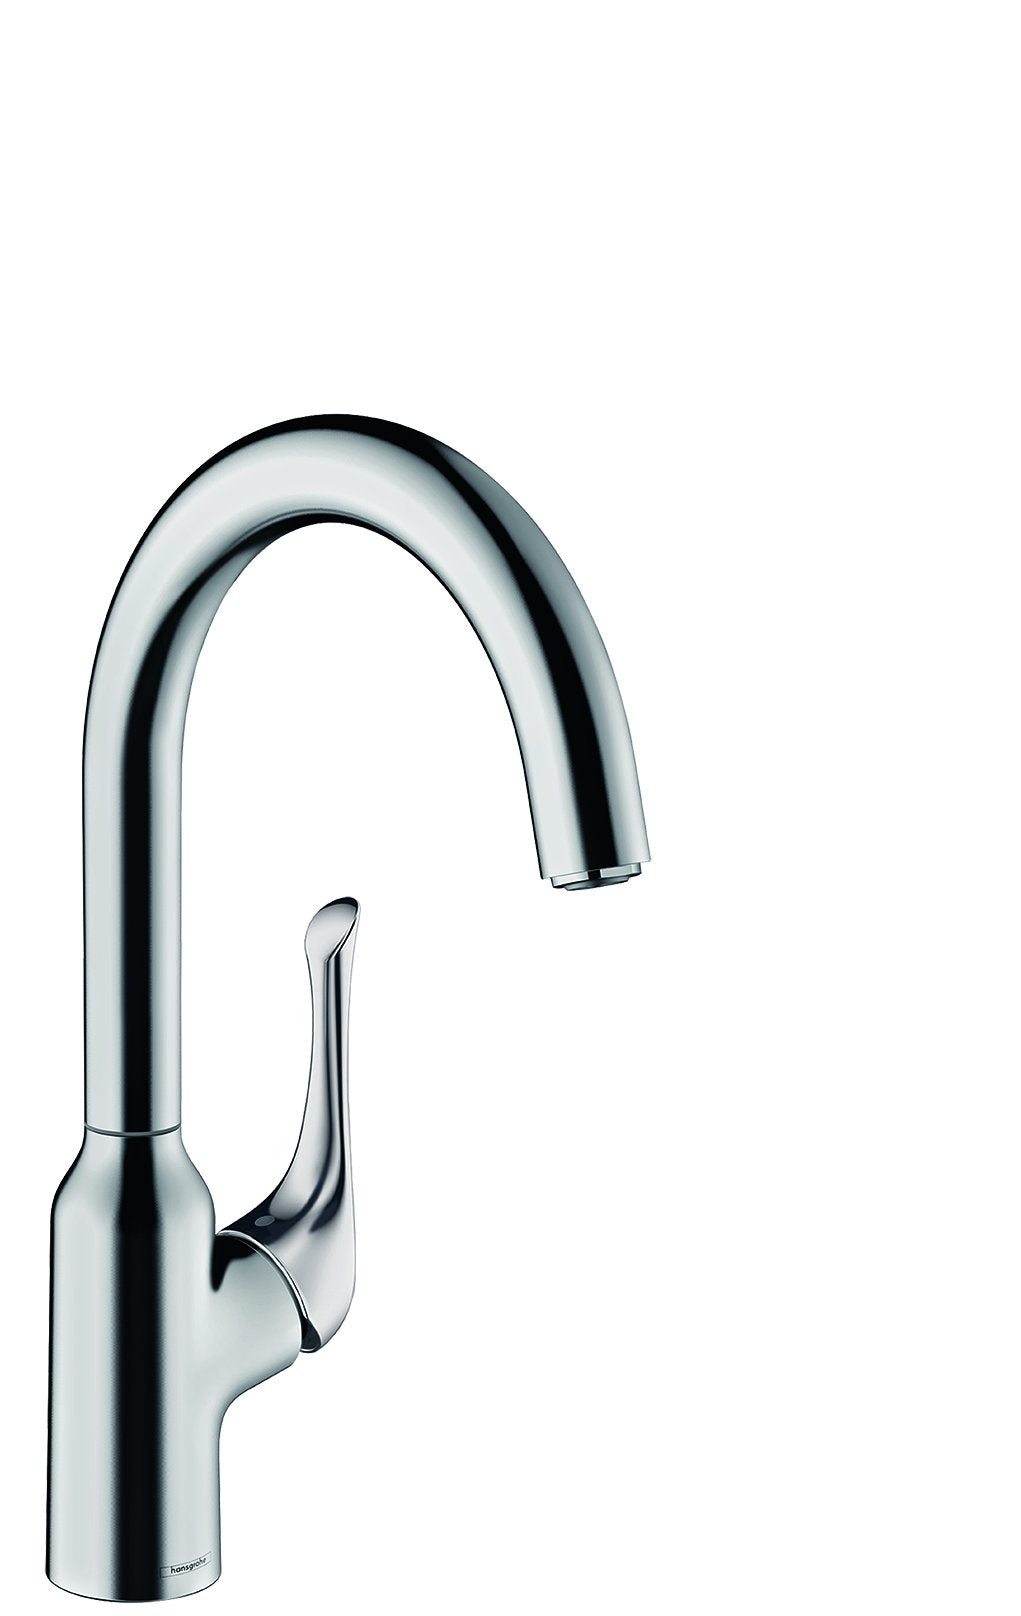 HANSGROHE 71845001 Chrome Allegro N Modern Kitchen Faucet 1.75 GPM